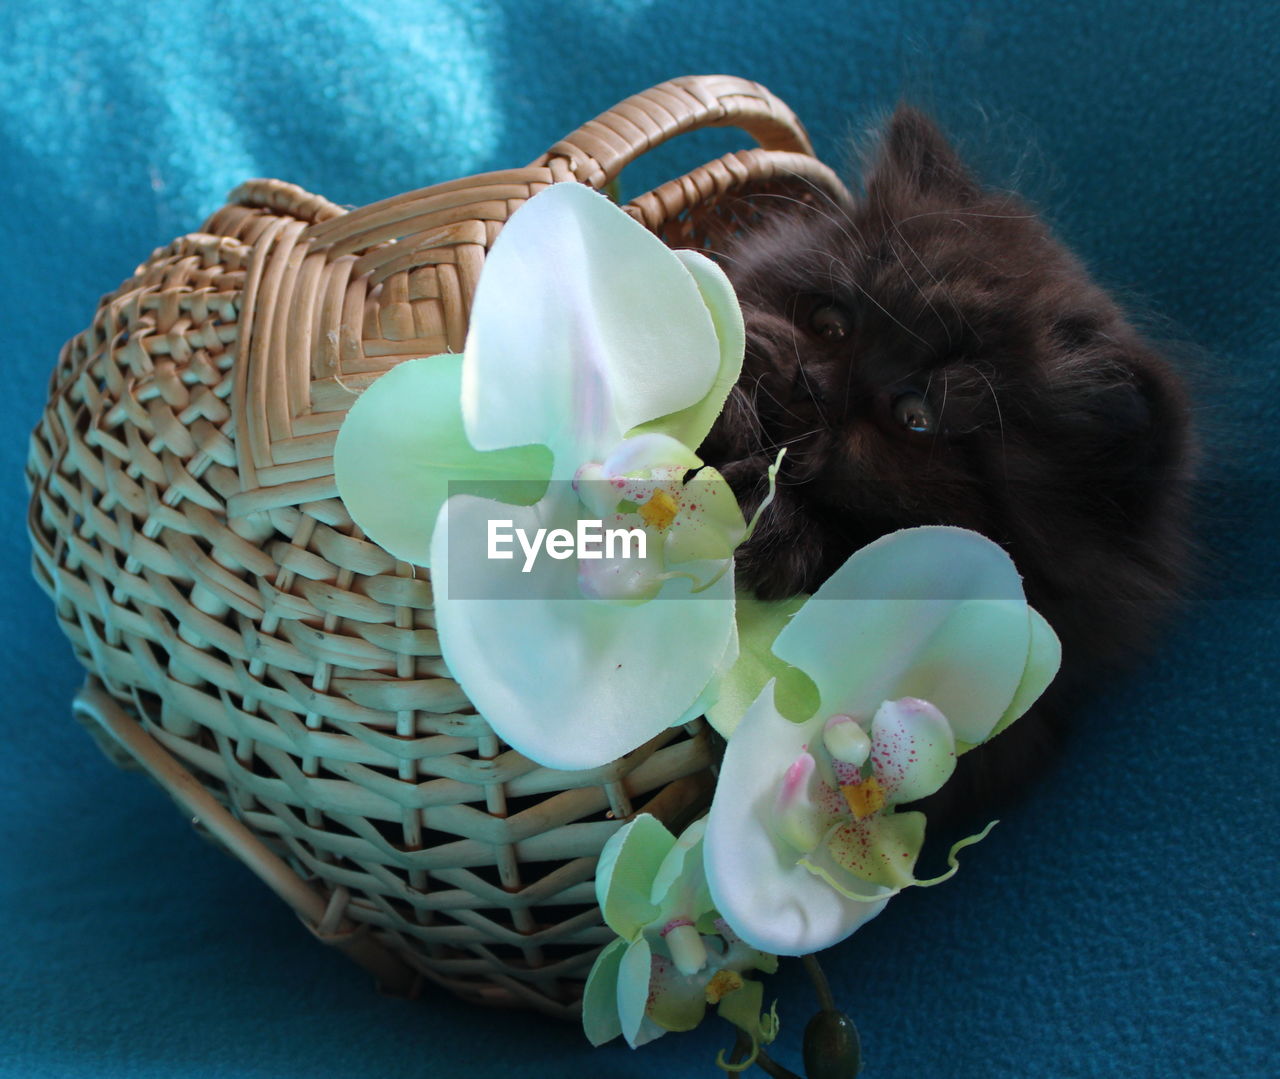 British longhair kitten in basket with orchids